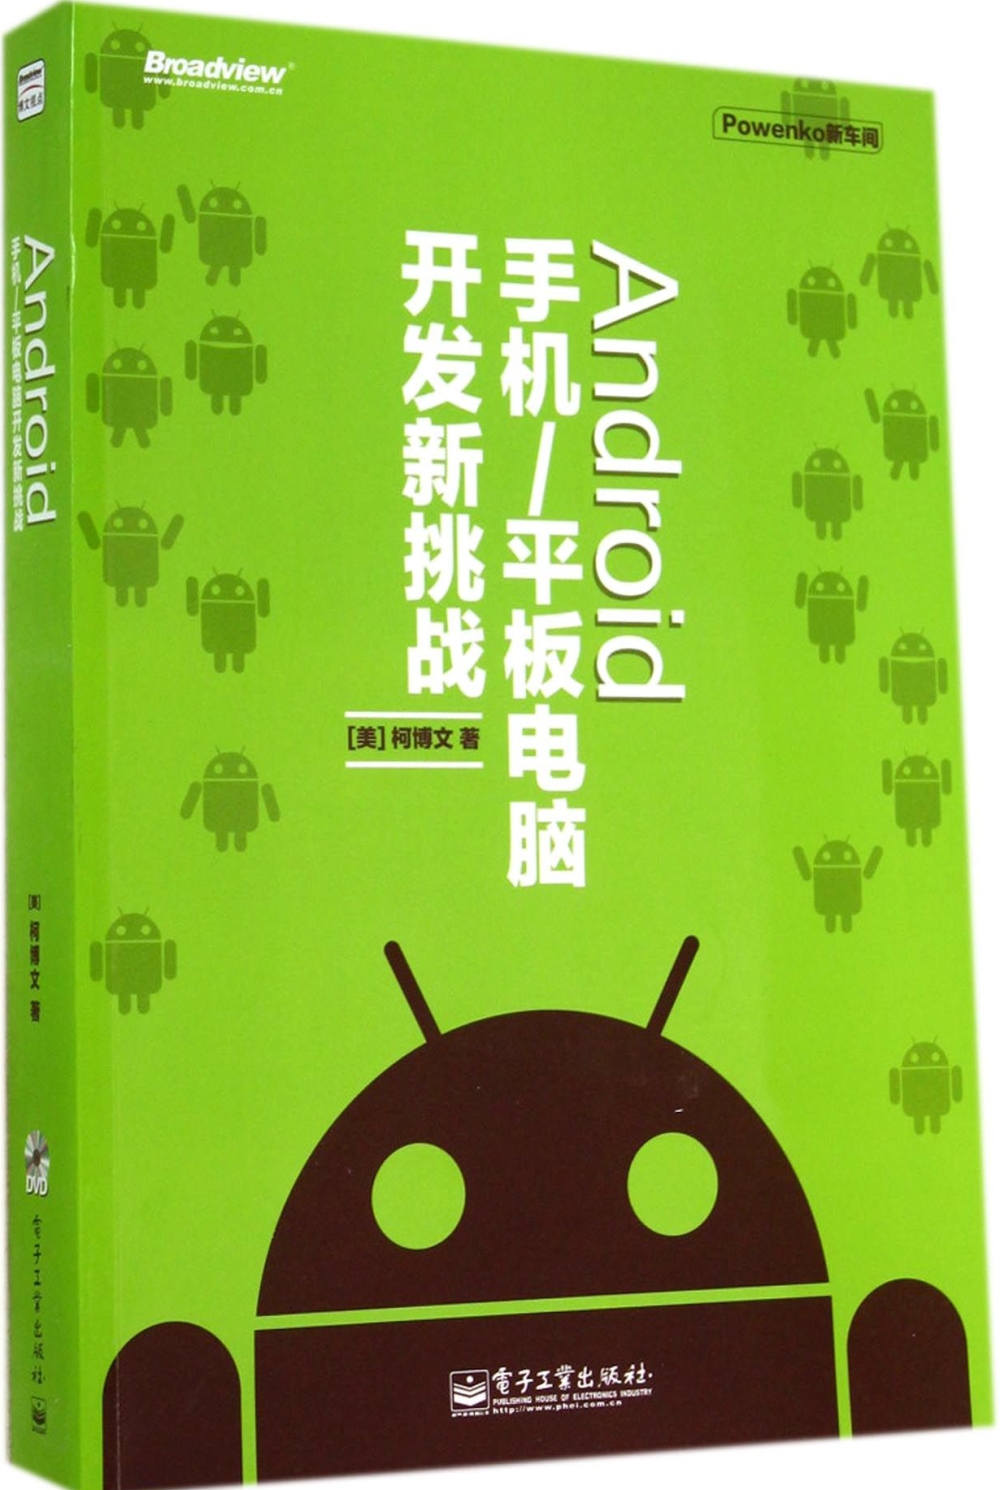 Android 手機/平板電腦開發新挑戰